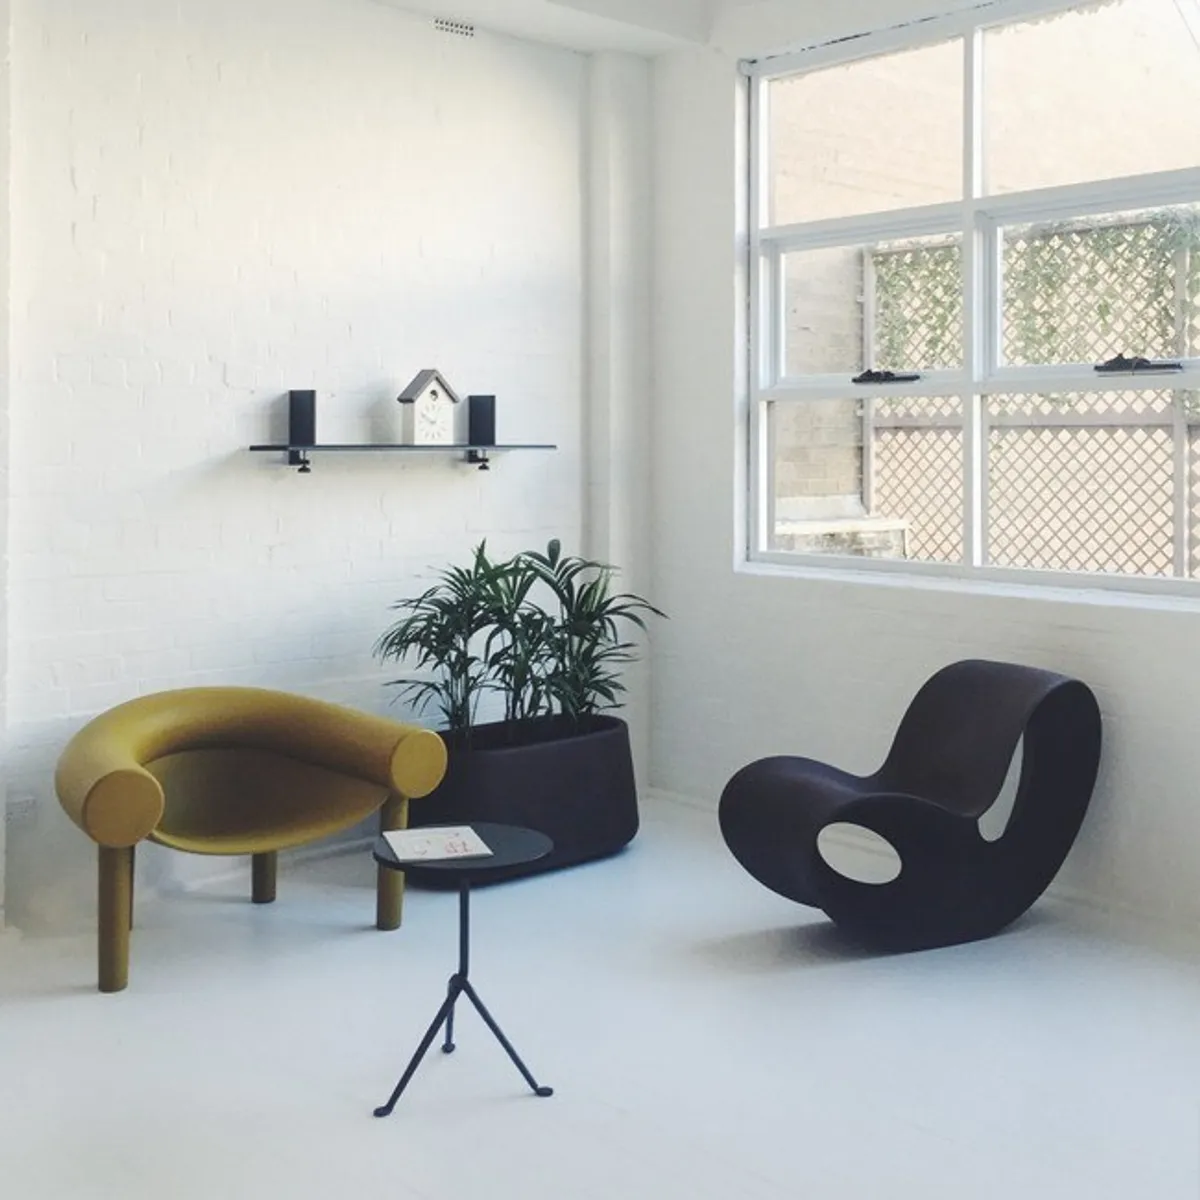 Voido Chair In Situ 02